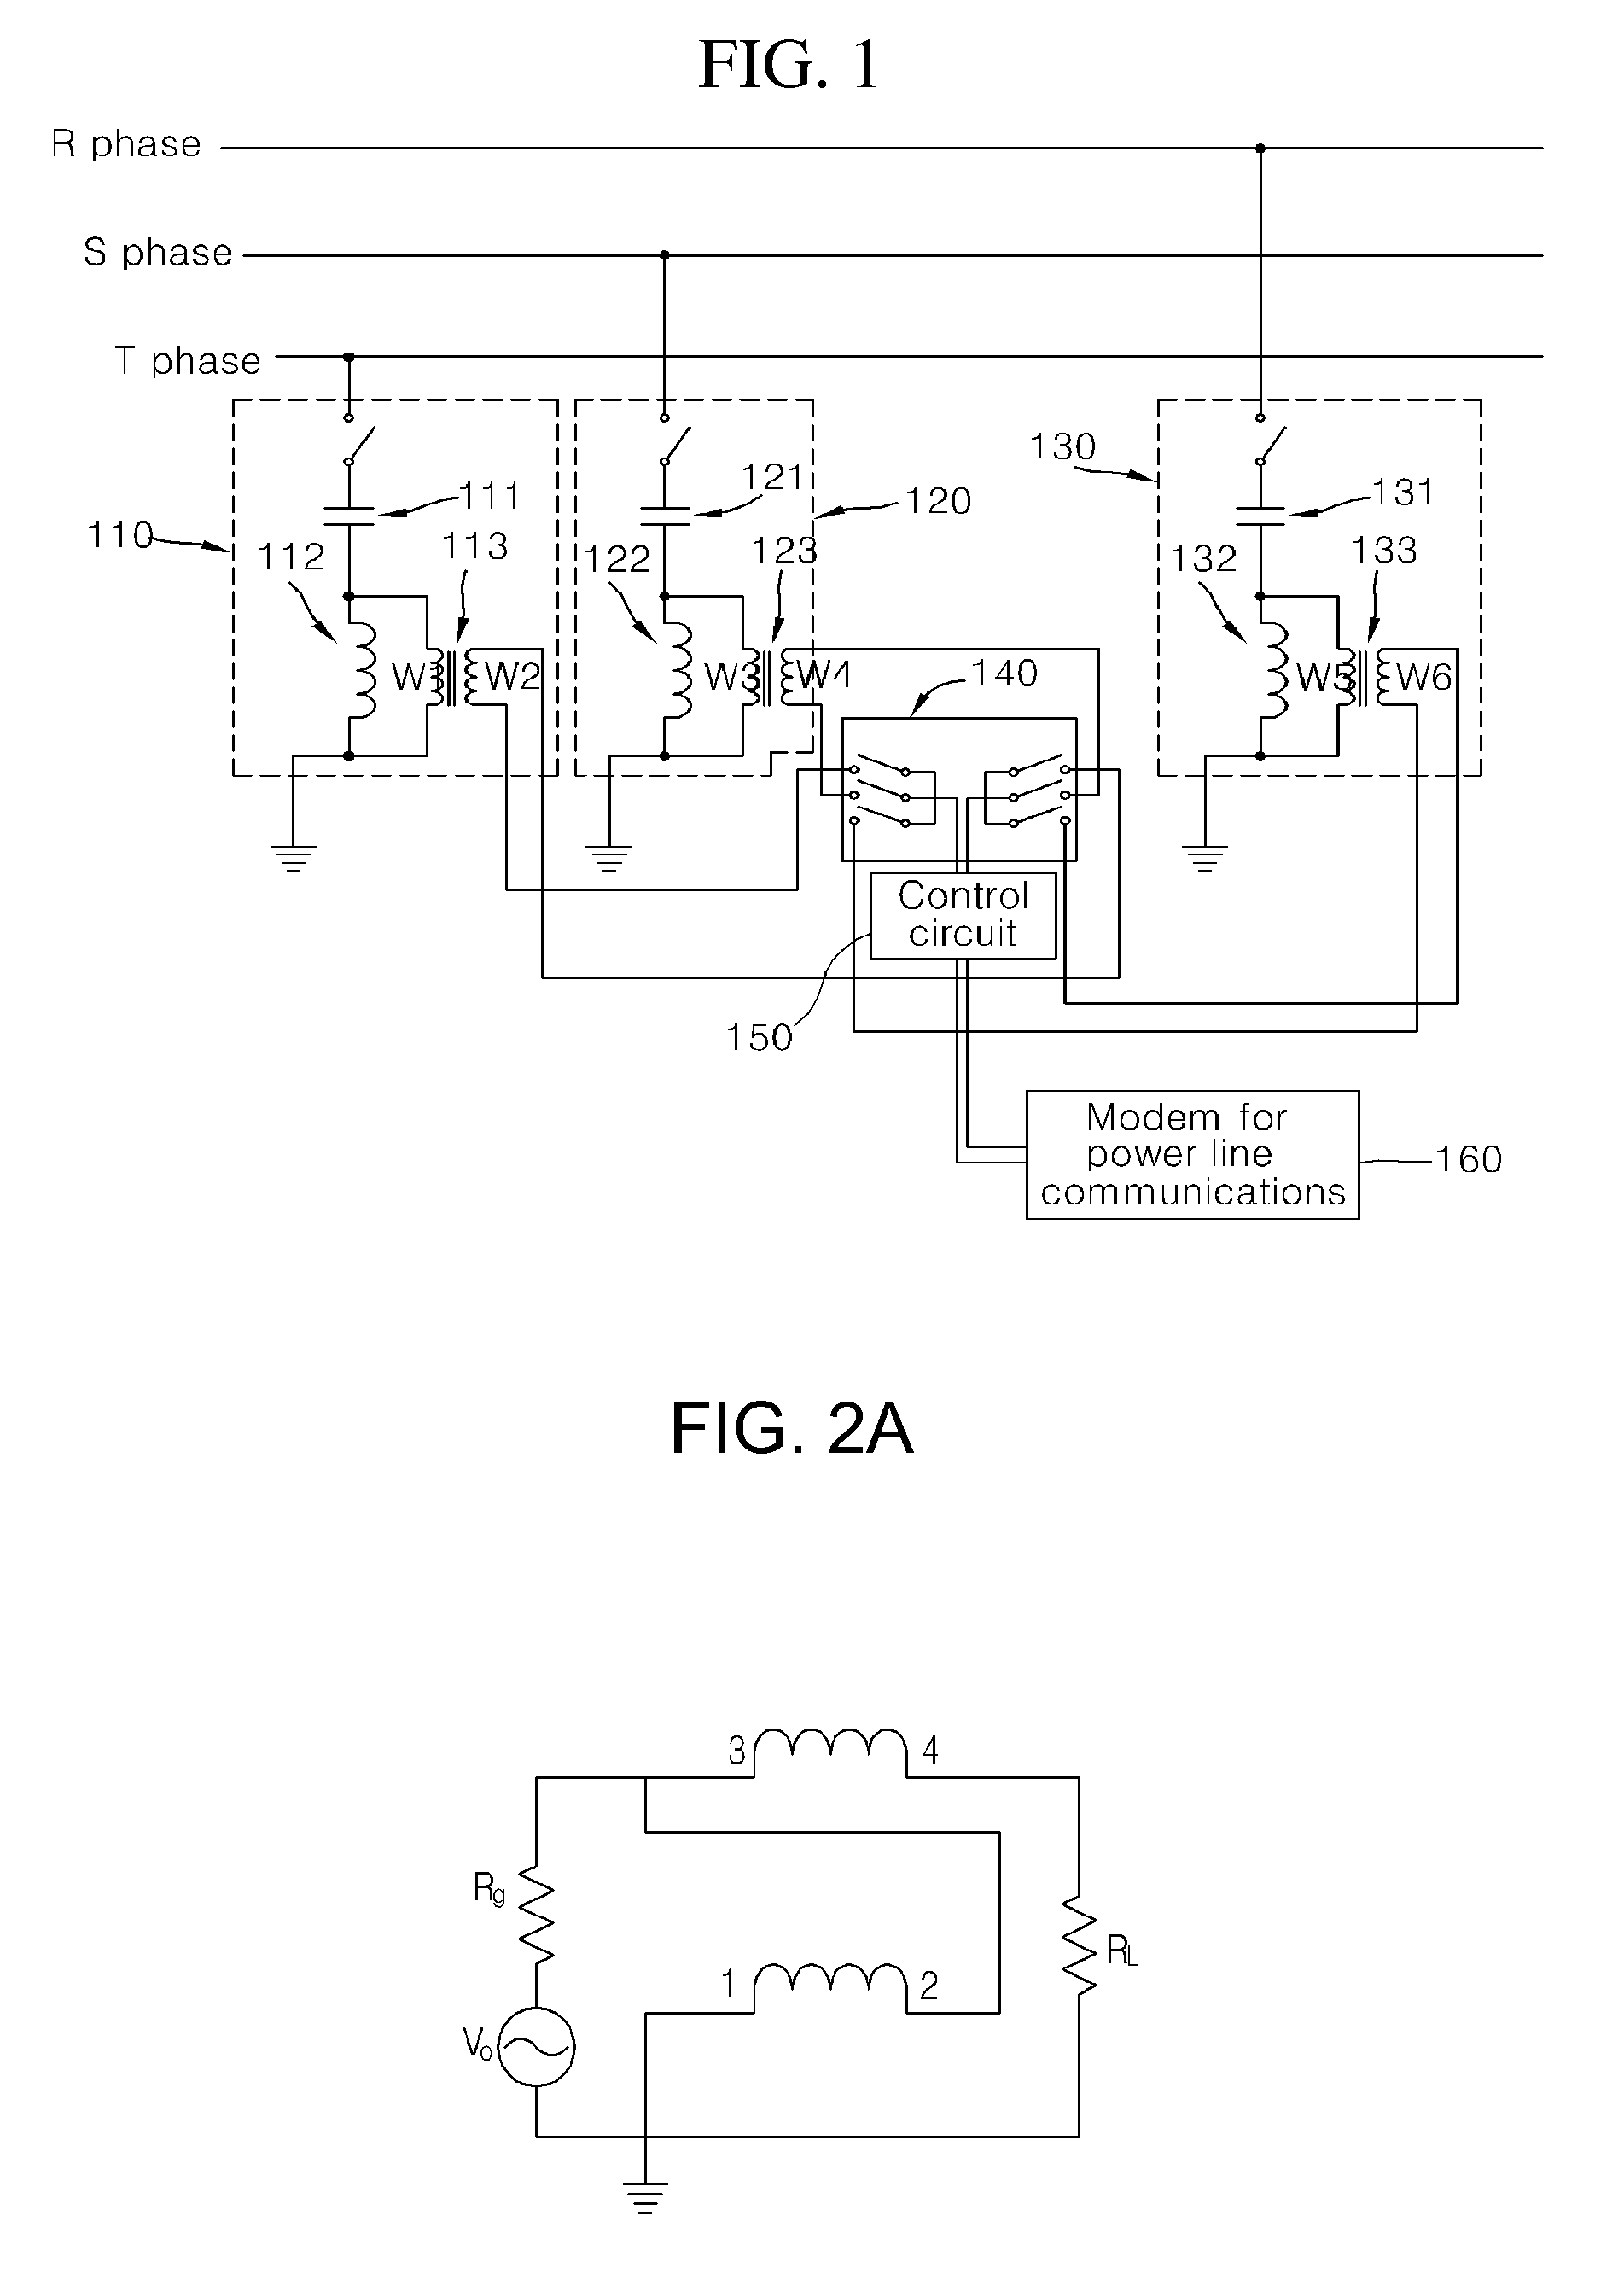 Signal Coupling Apparatus For Power Line Communications Using A Three-Phase Four-Wire Power Line